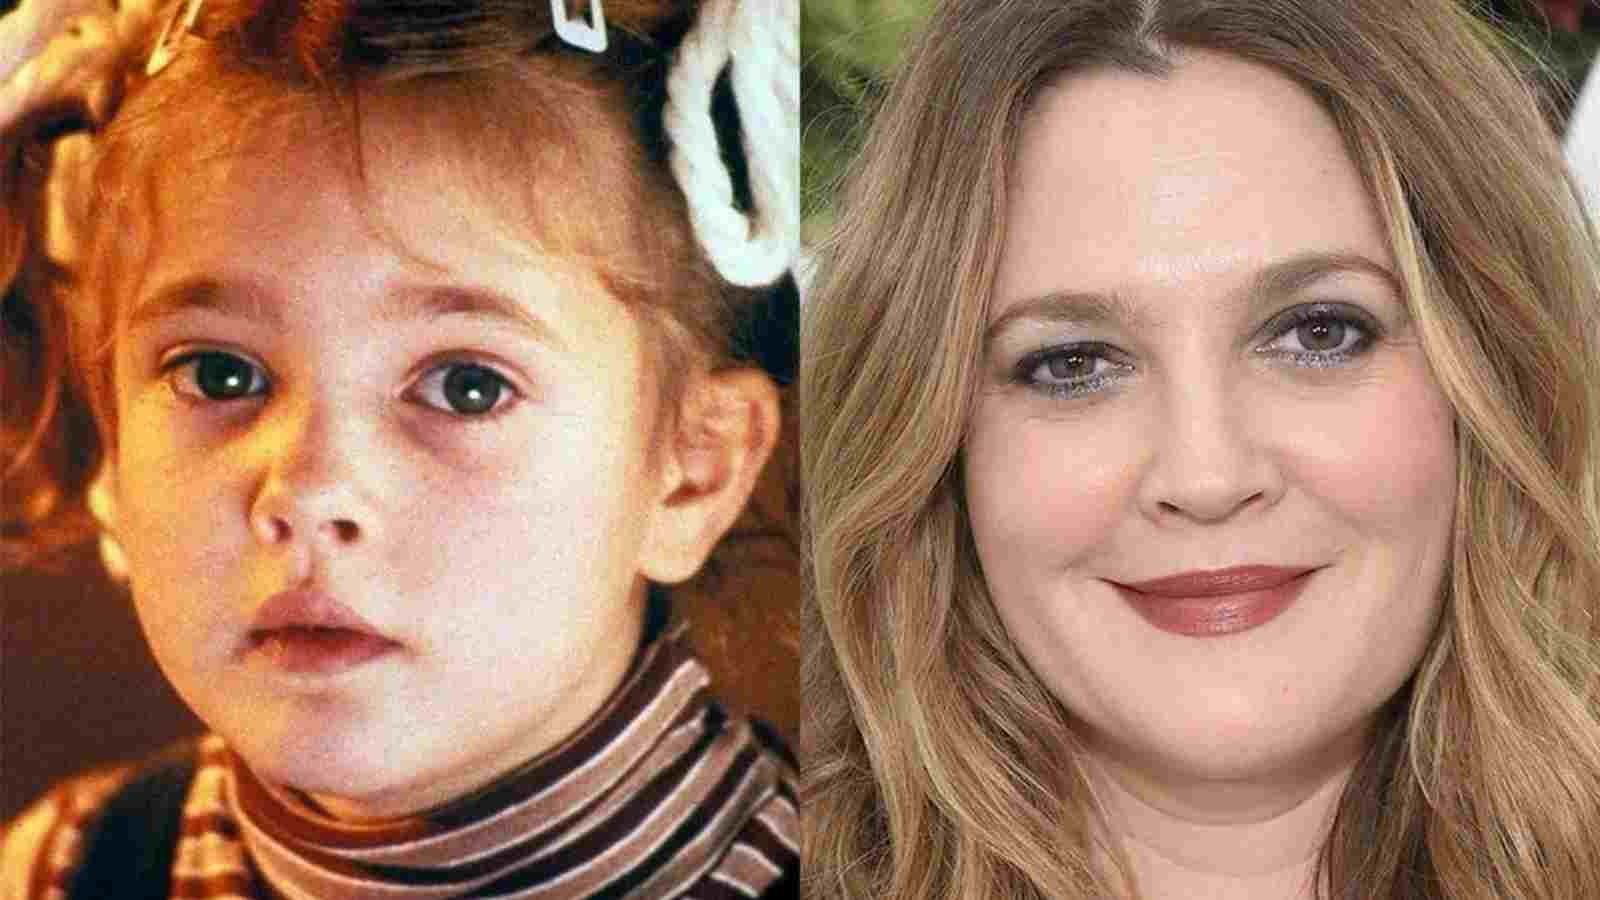 Drew Barrymore started her acting career very young, when she was only 11 months old